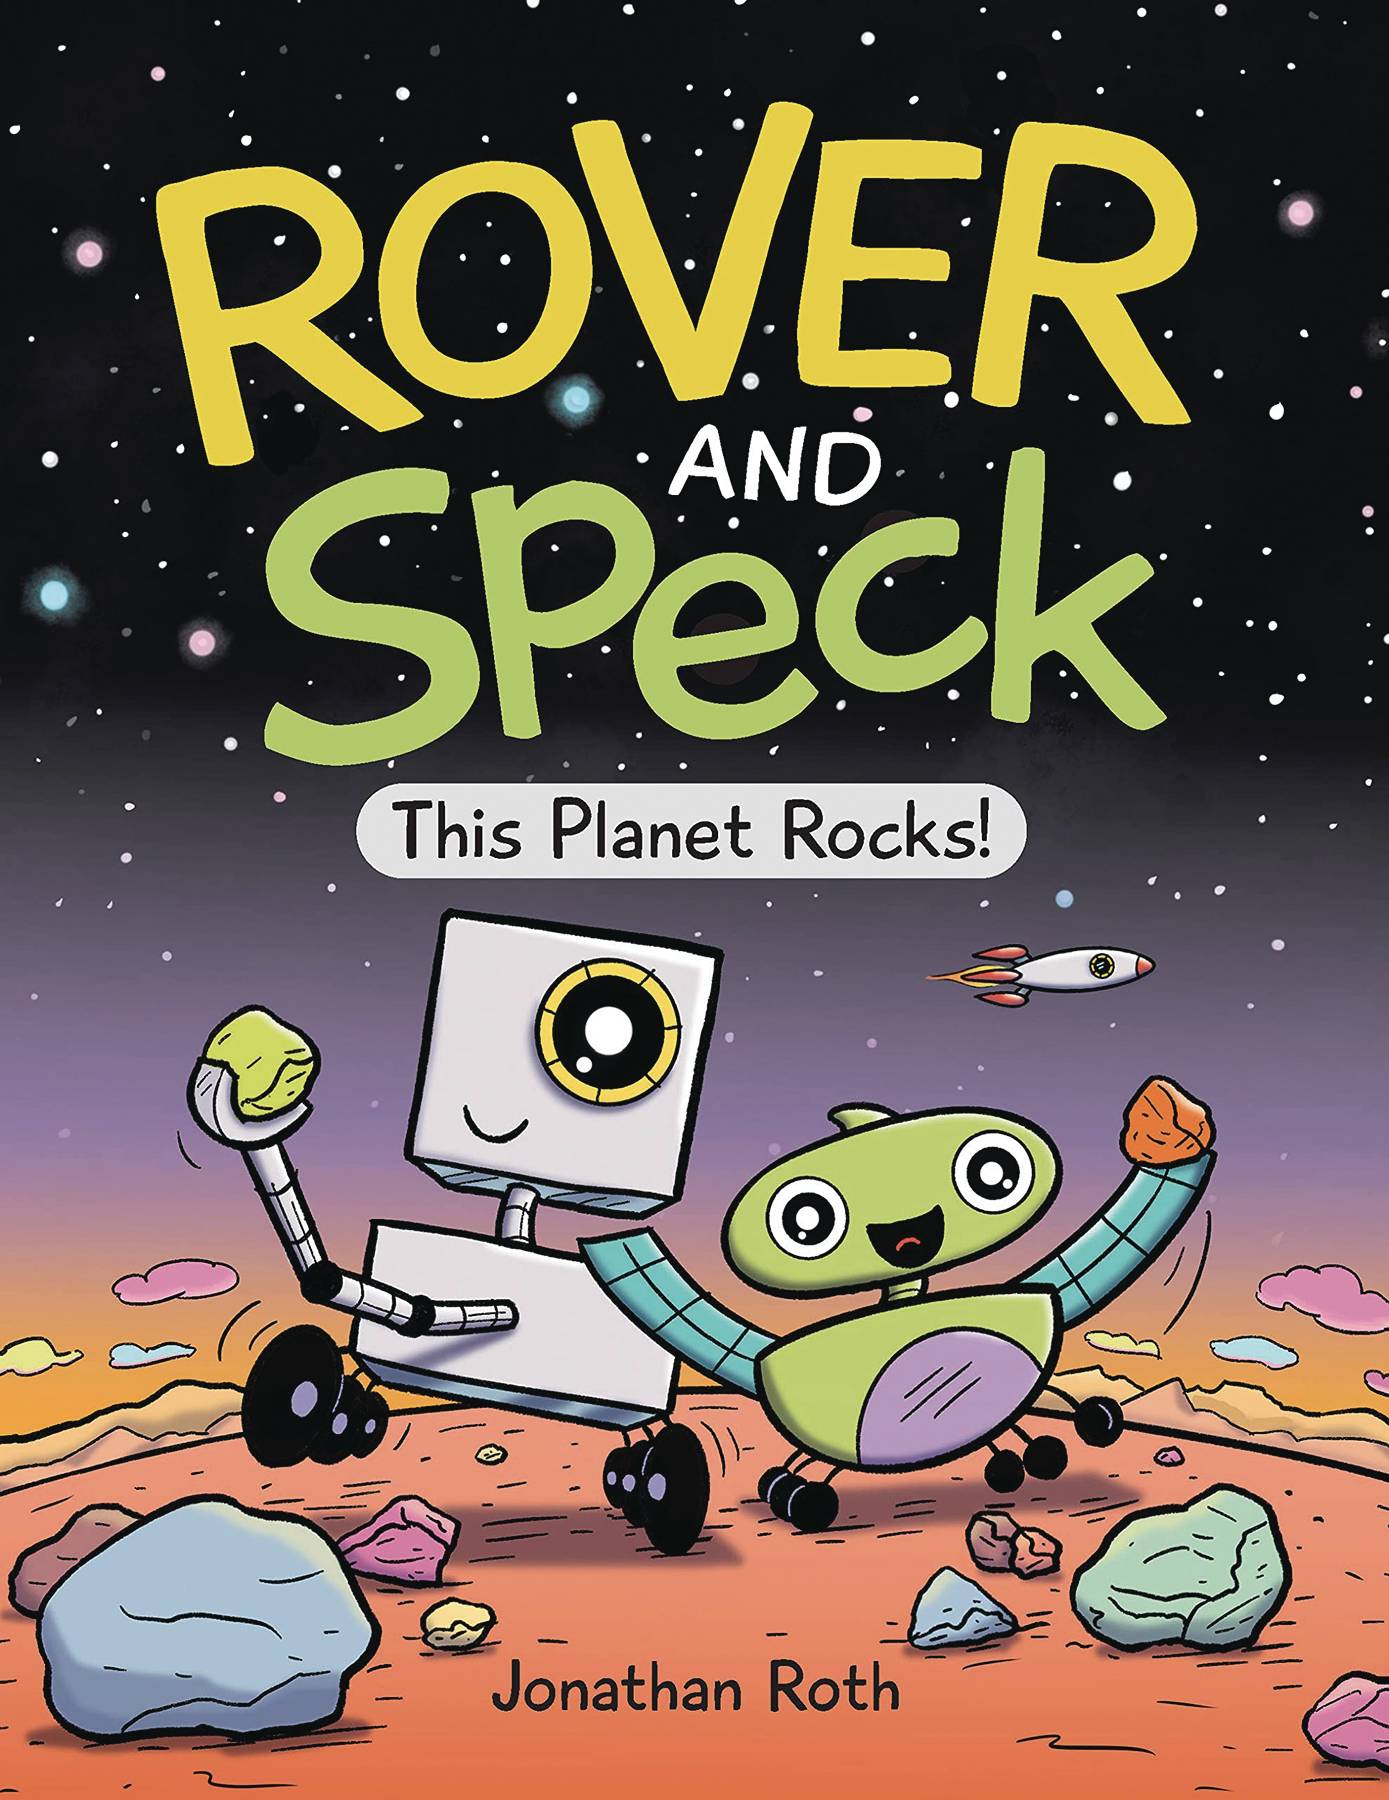 ROVER AND SPECK GN VOL 01 THIS PLANET ROCKS